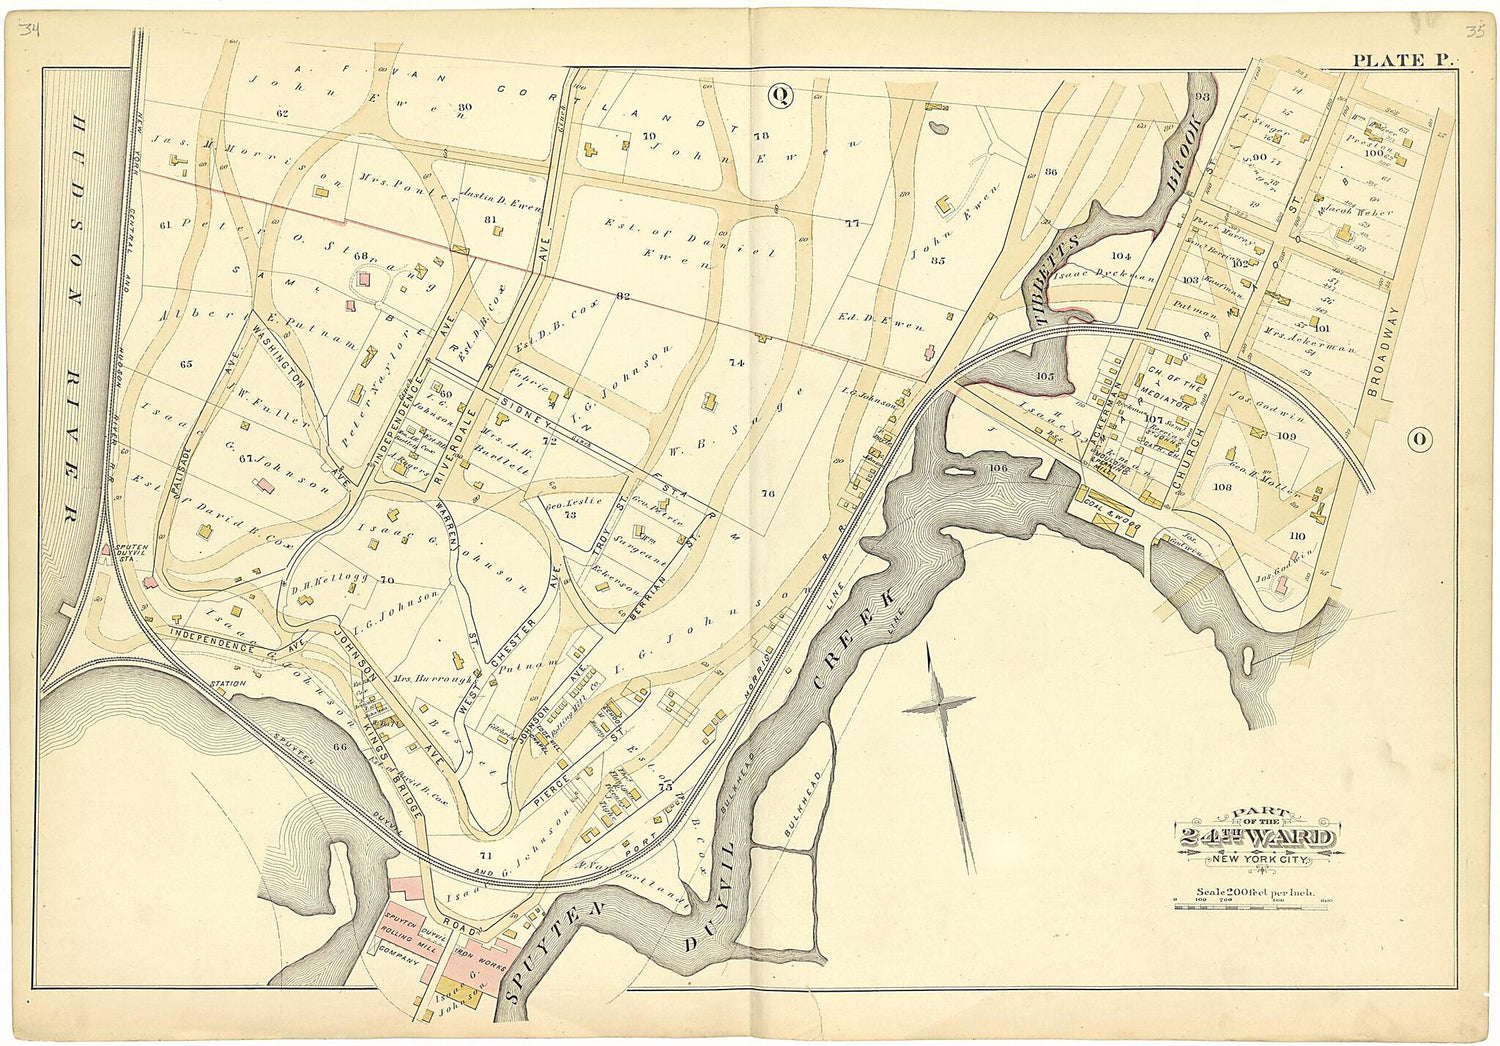 This old map of Part of the 24th Ward New York City - Plate P from Atlas of the Twenty Fourth Ward, New York City from 1882 was created by A. H. (August H.) Mueller in 1882